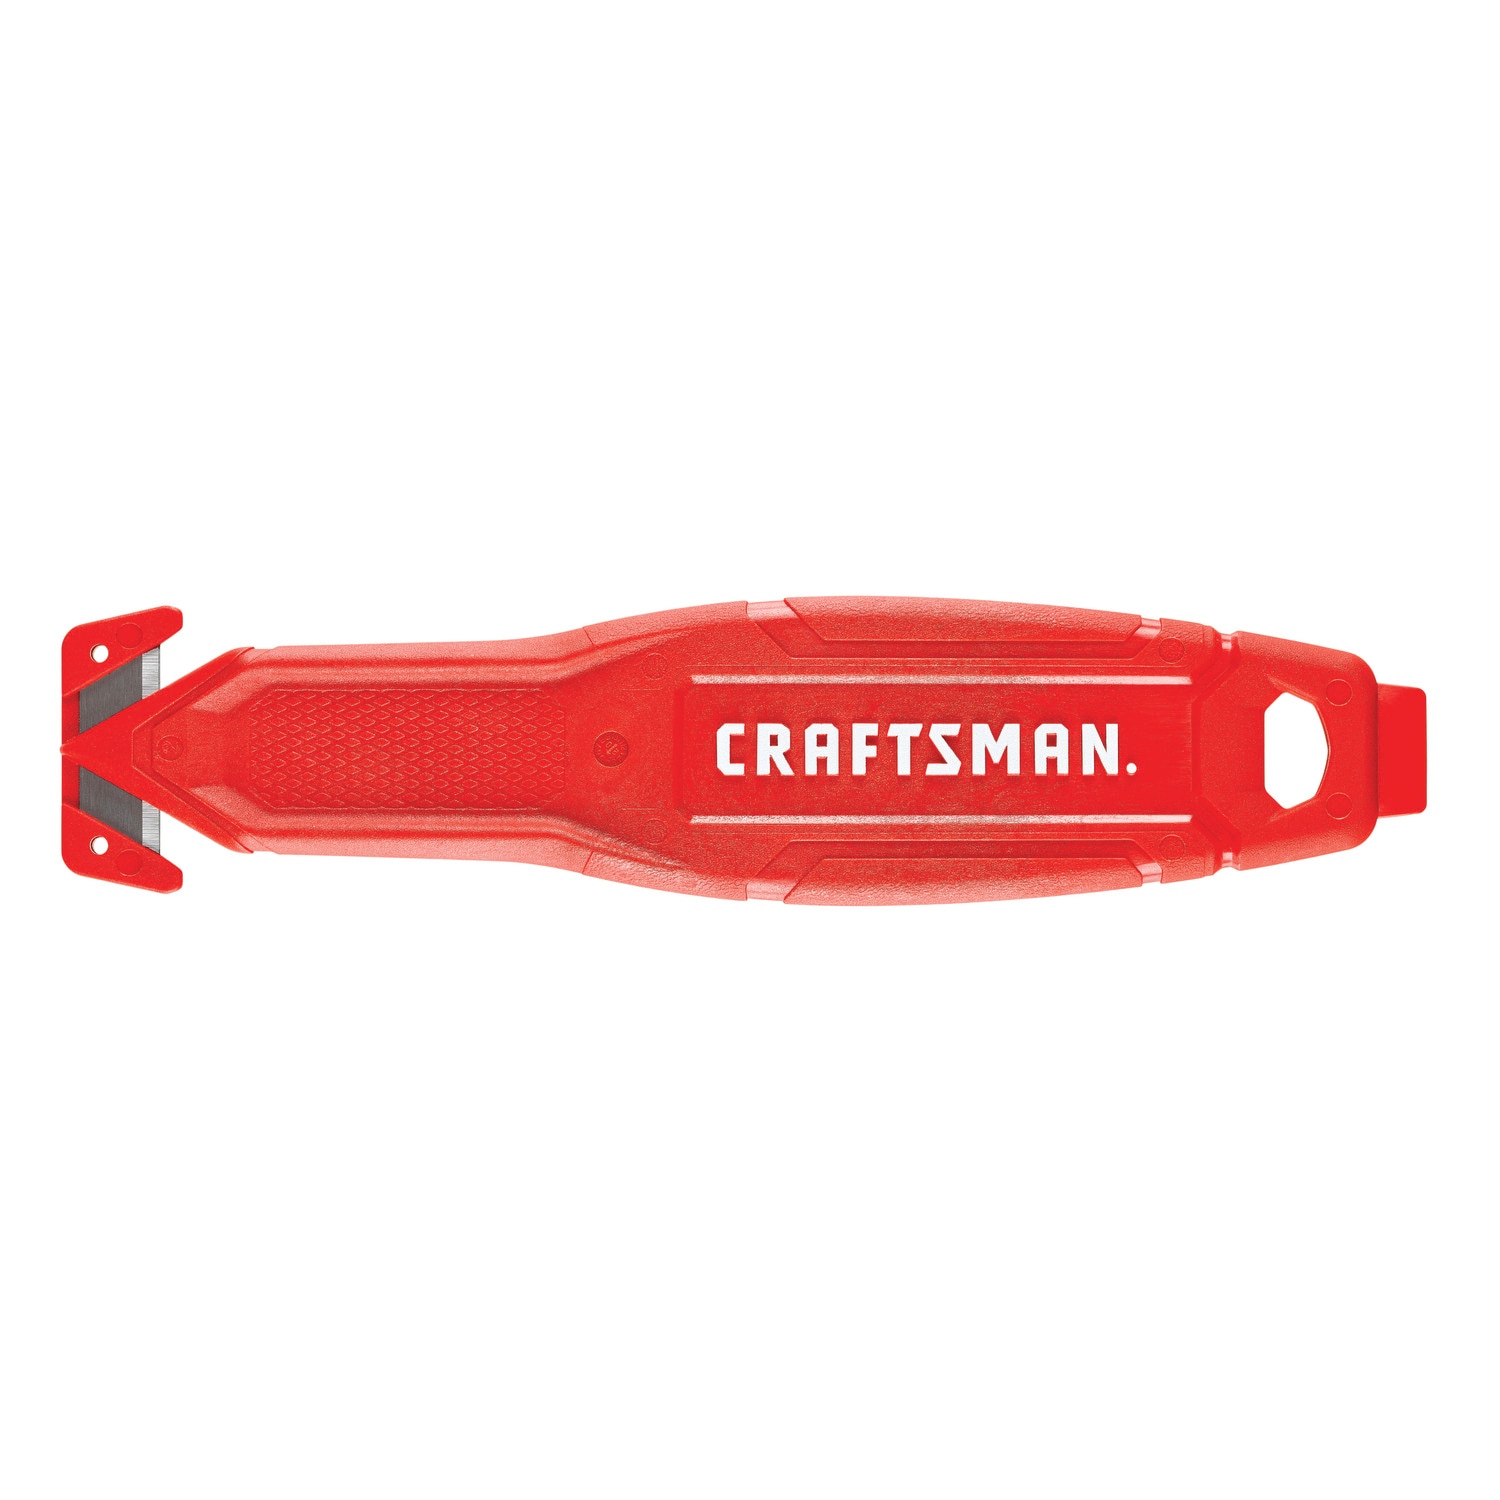 CRAFTSMAN 1-Blade Folding Utility Knife in the Utility Knives